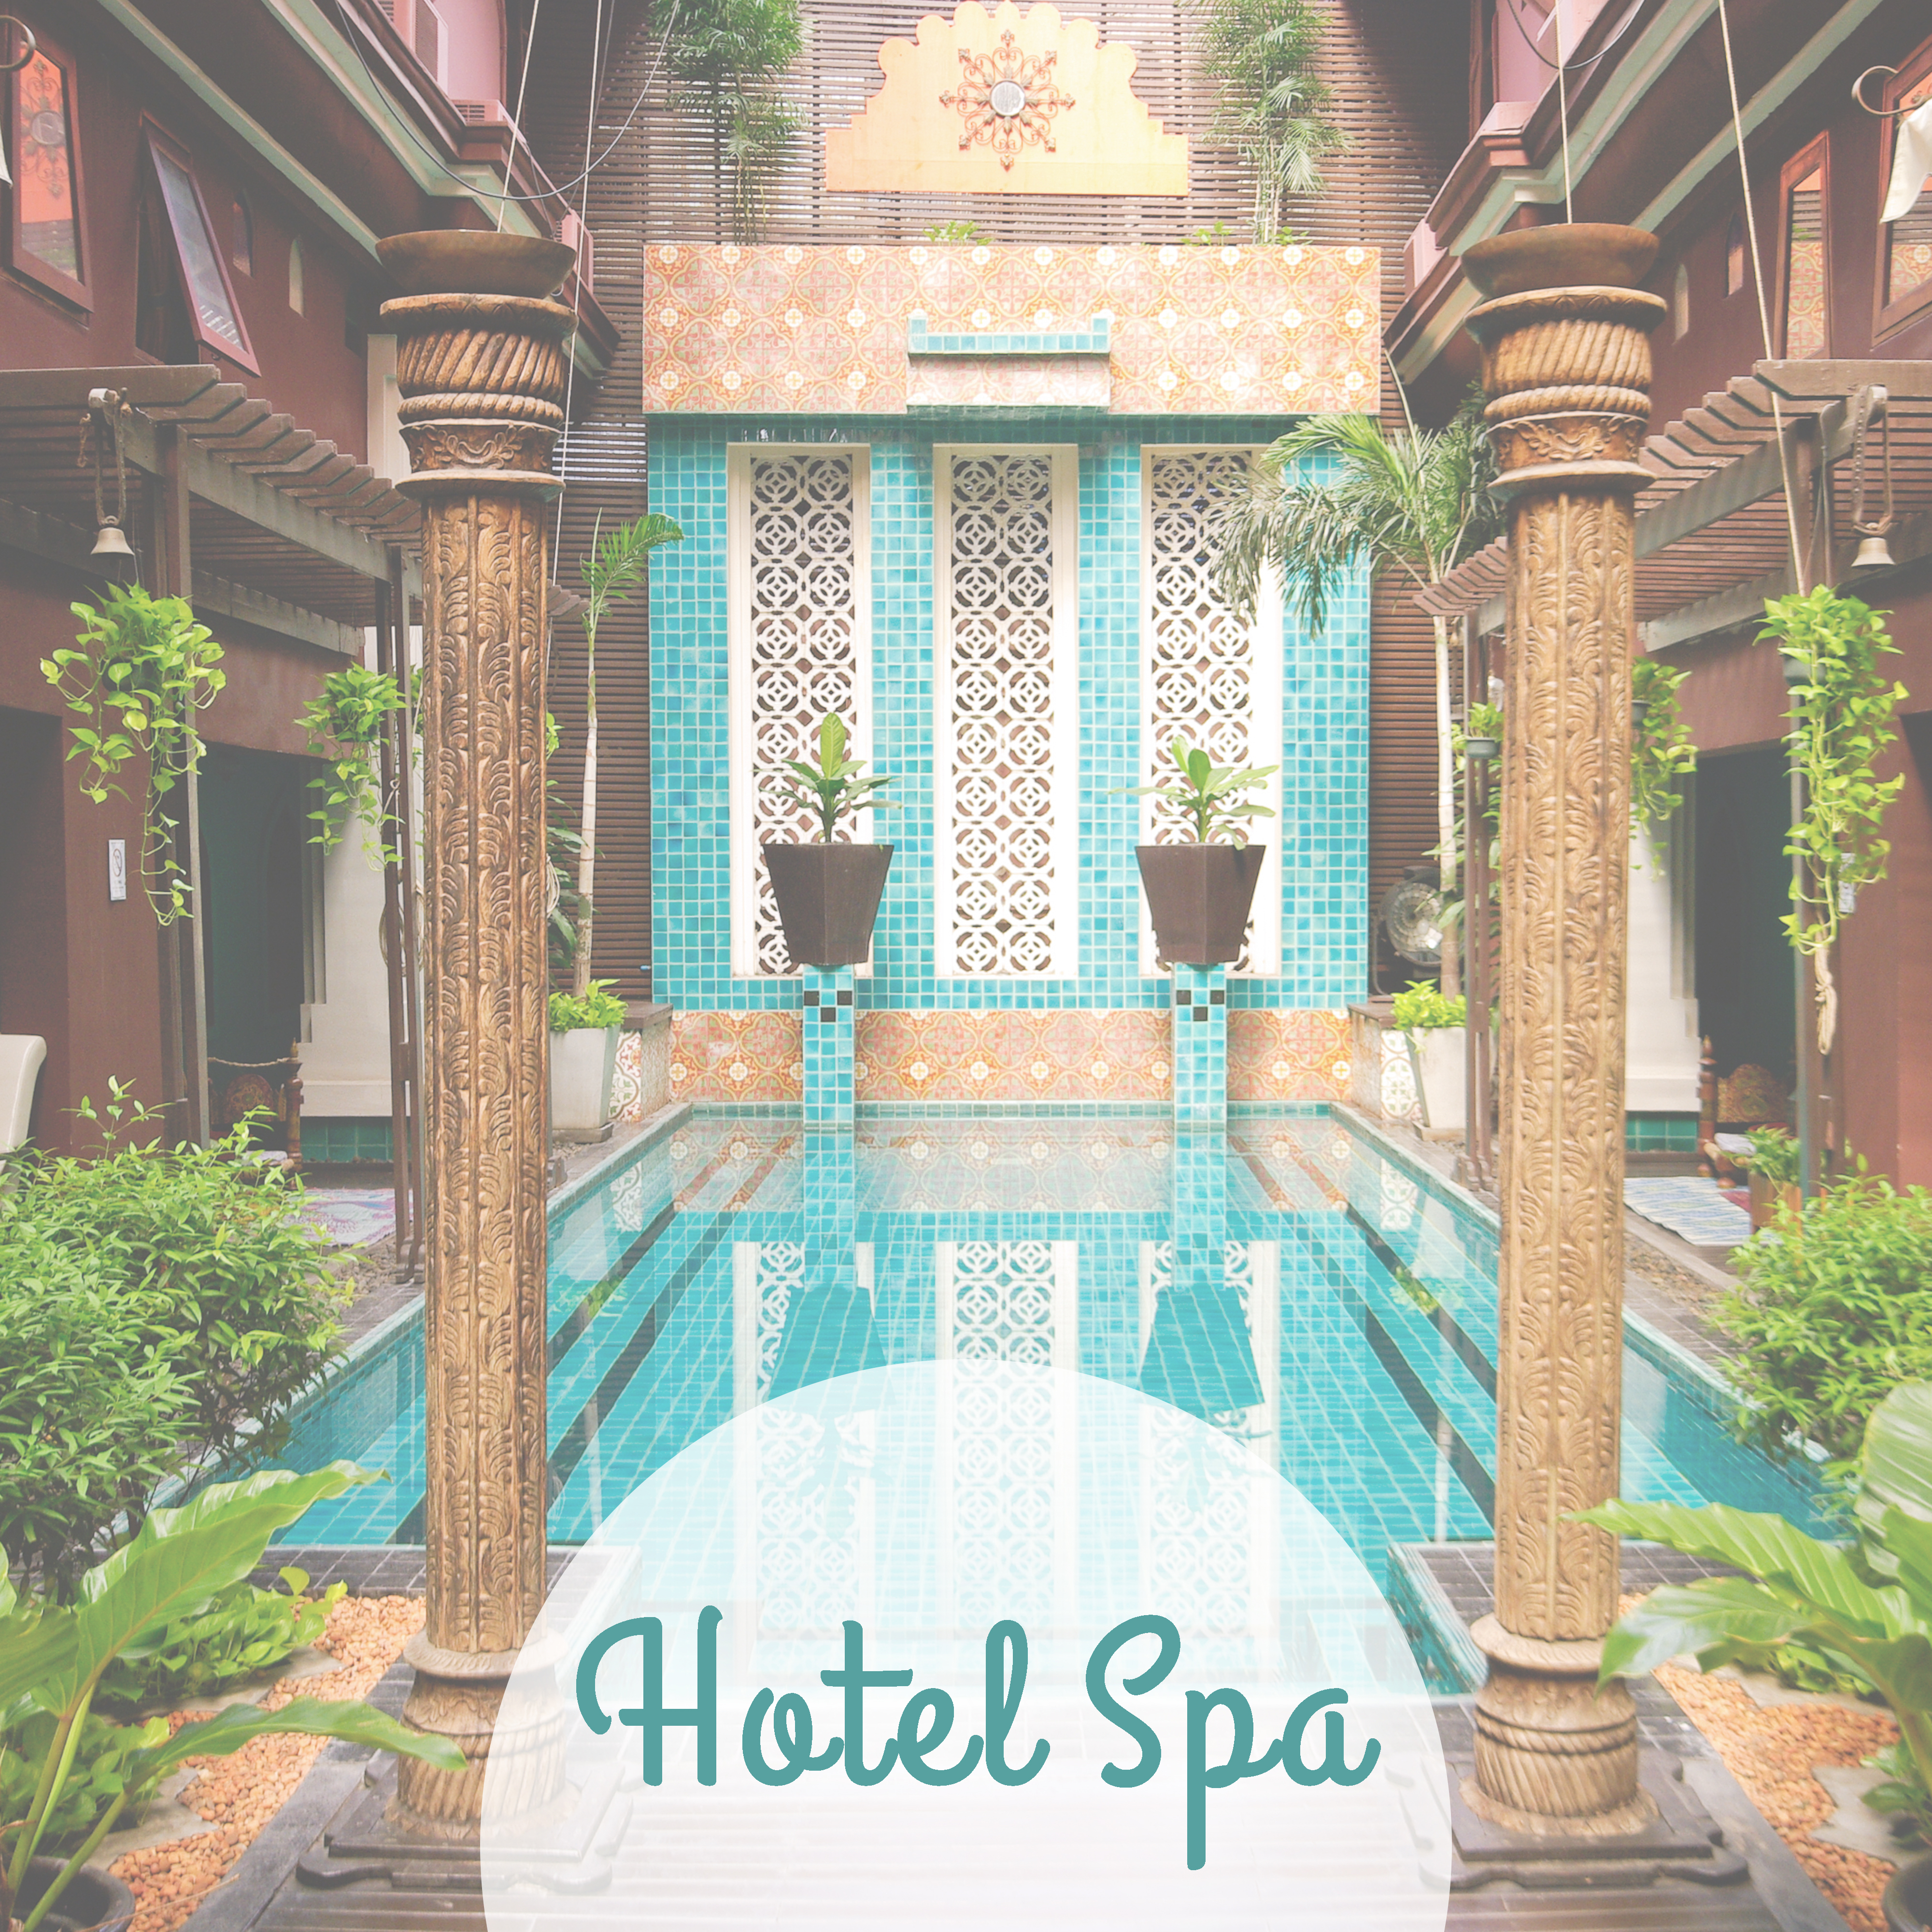 Hotel Spa – 15 Relaxing Songs for Massage, Sleep, Wellness, Pure Mind, Bliss Spa, Soft Music